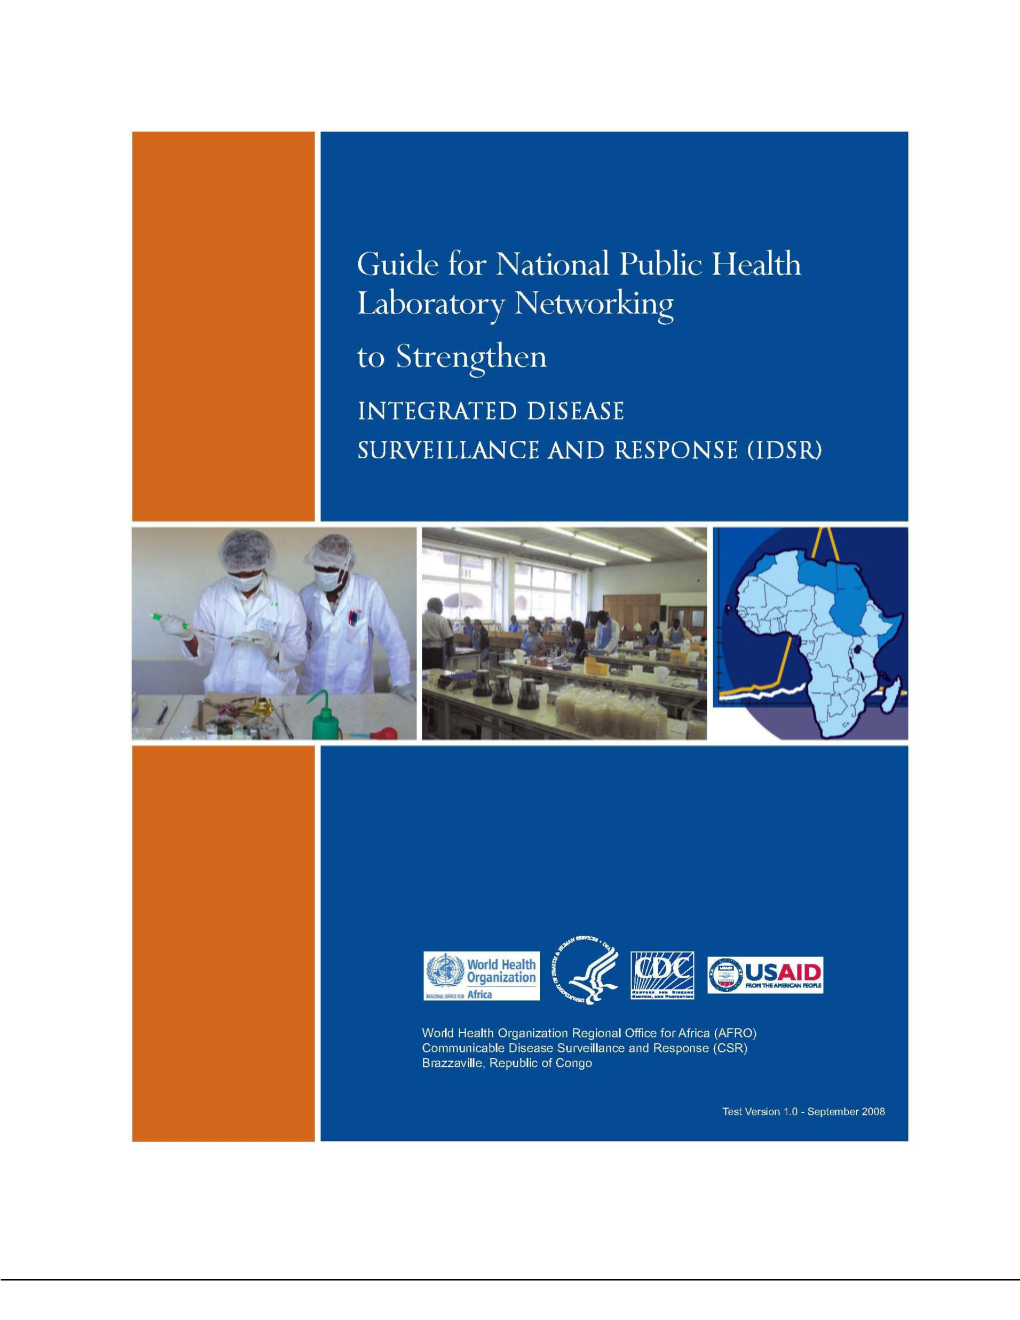 National Public Health Laboratory Networking to Strengthen